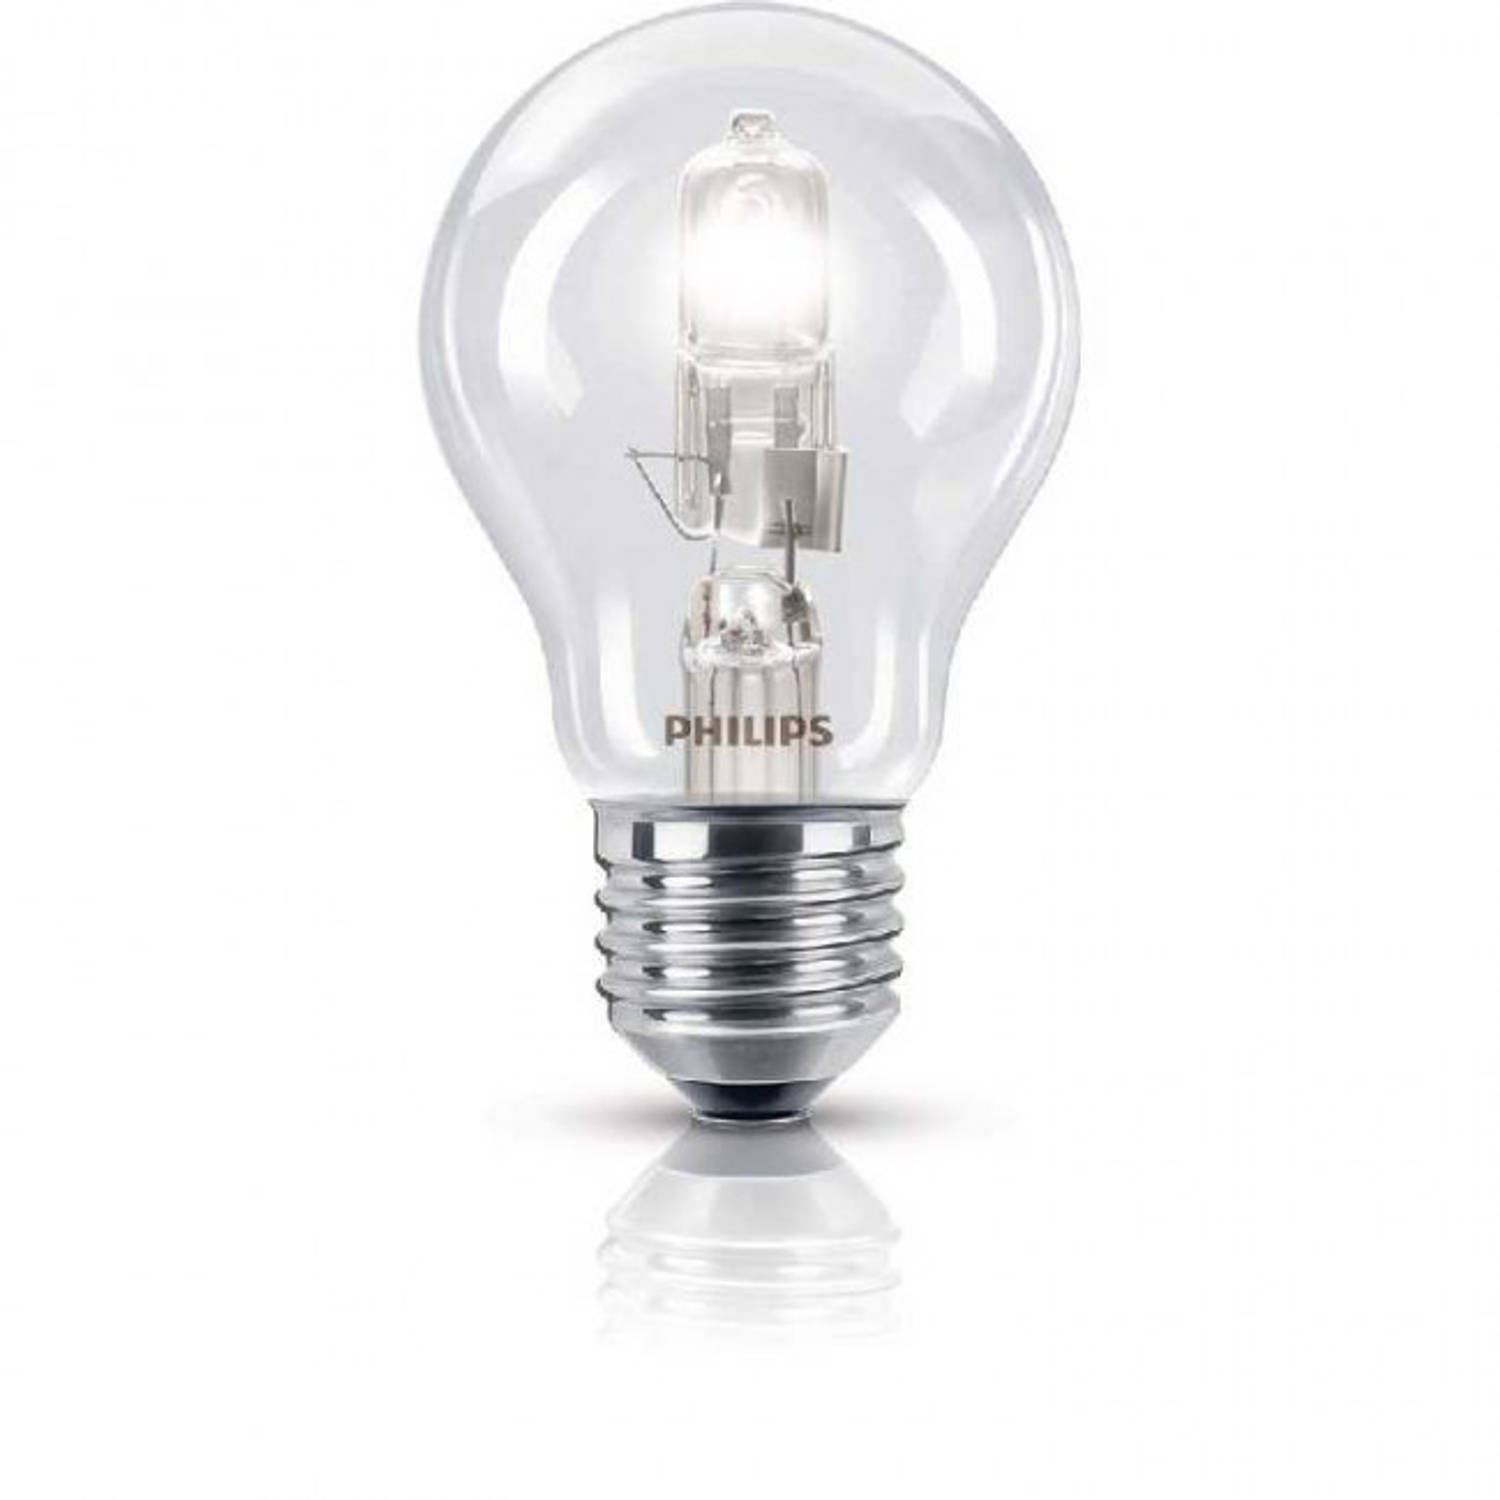 Halogeenlamp Philips Eco Classic 28W fitting E27